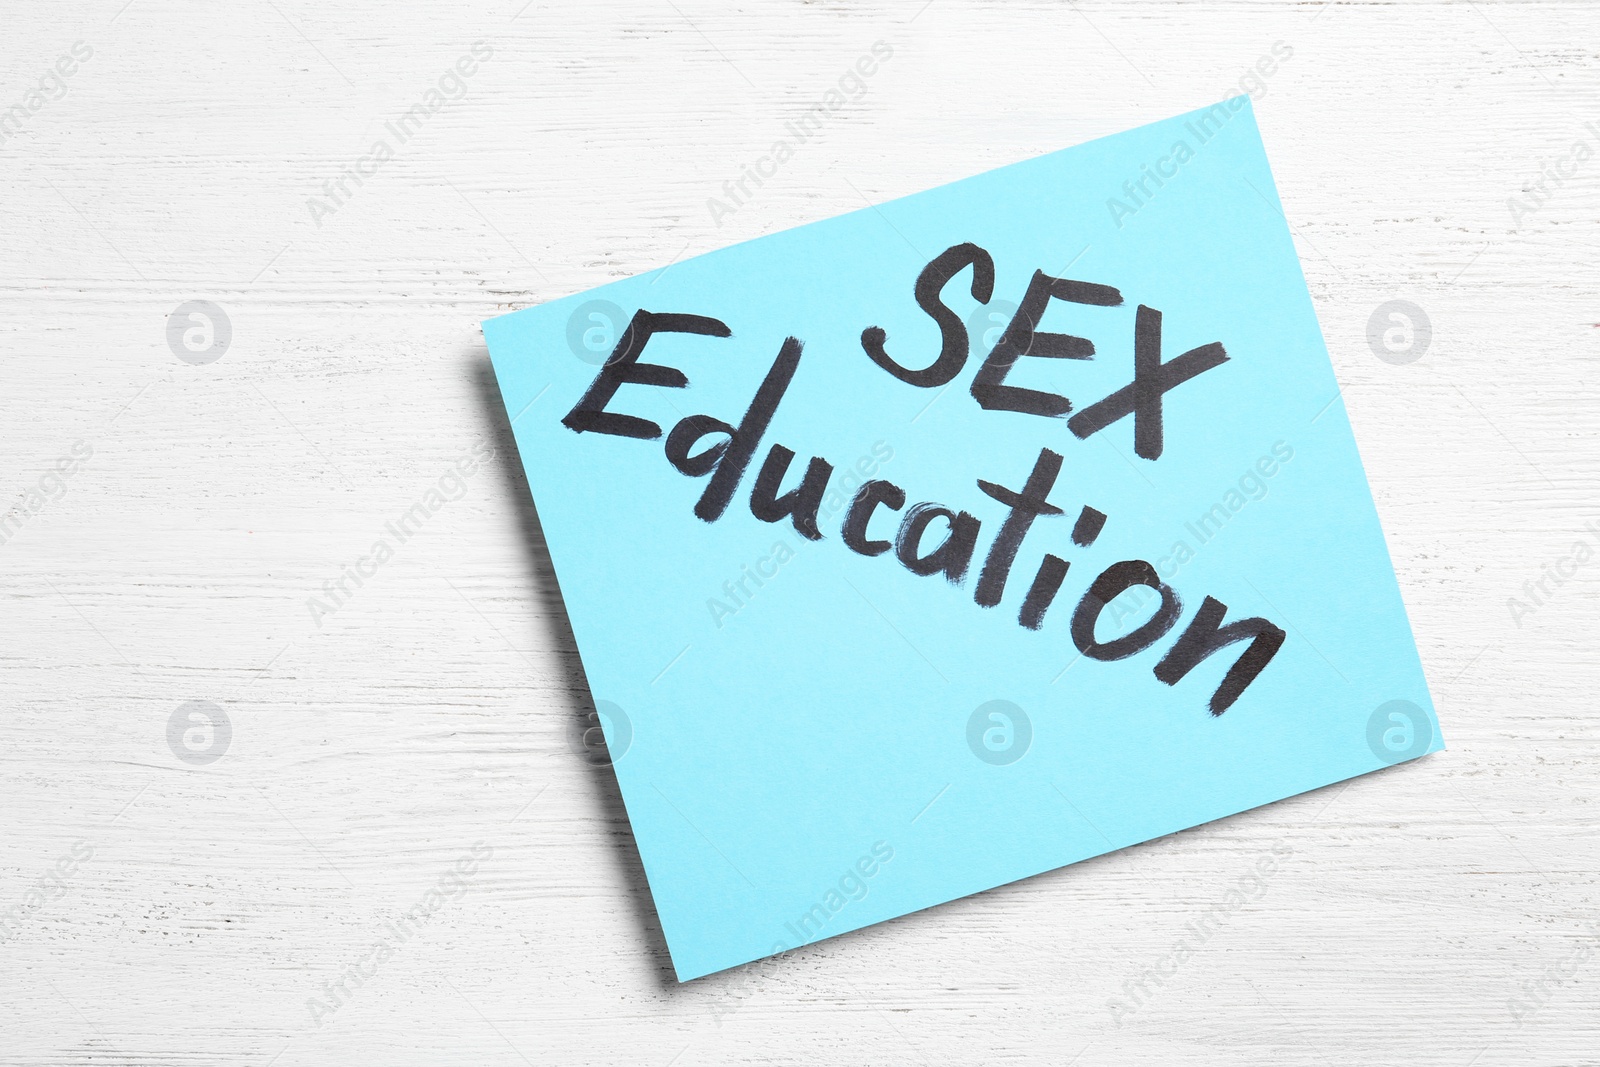 Photo of Note with phrase "SEX EDUCATION" on white wooden background, top view